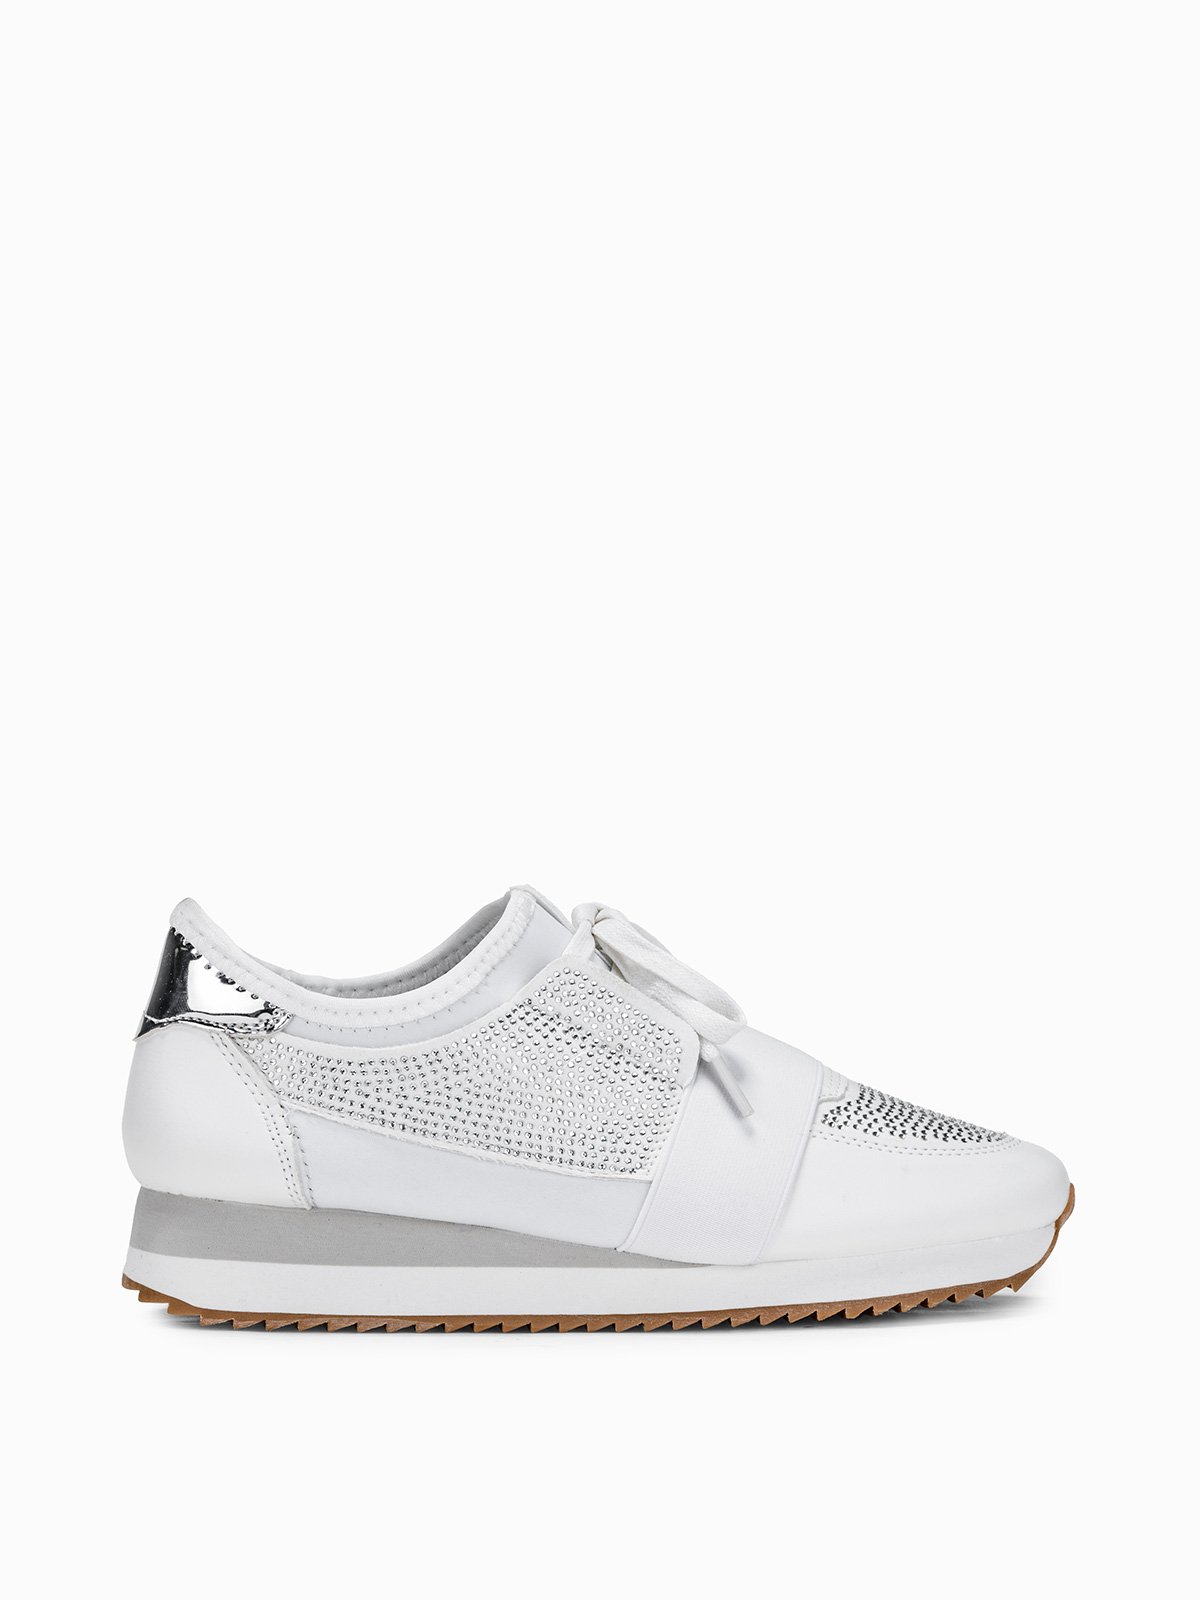 Women's trainers LR173 white | MODONE wholesale - Clothing For Men